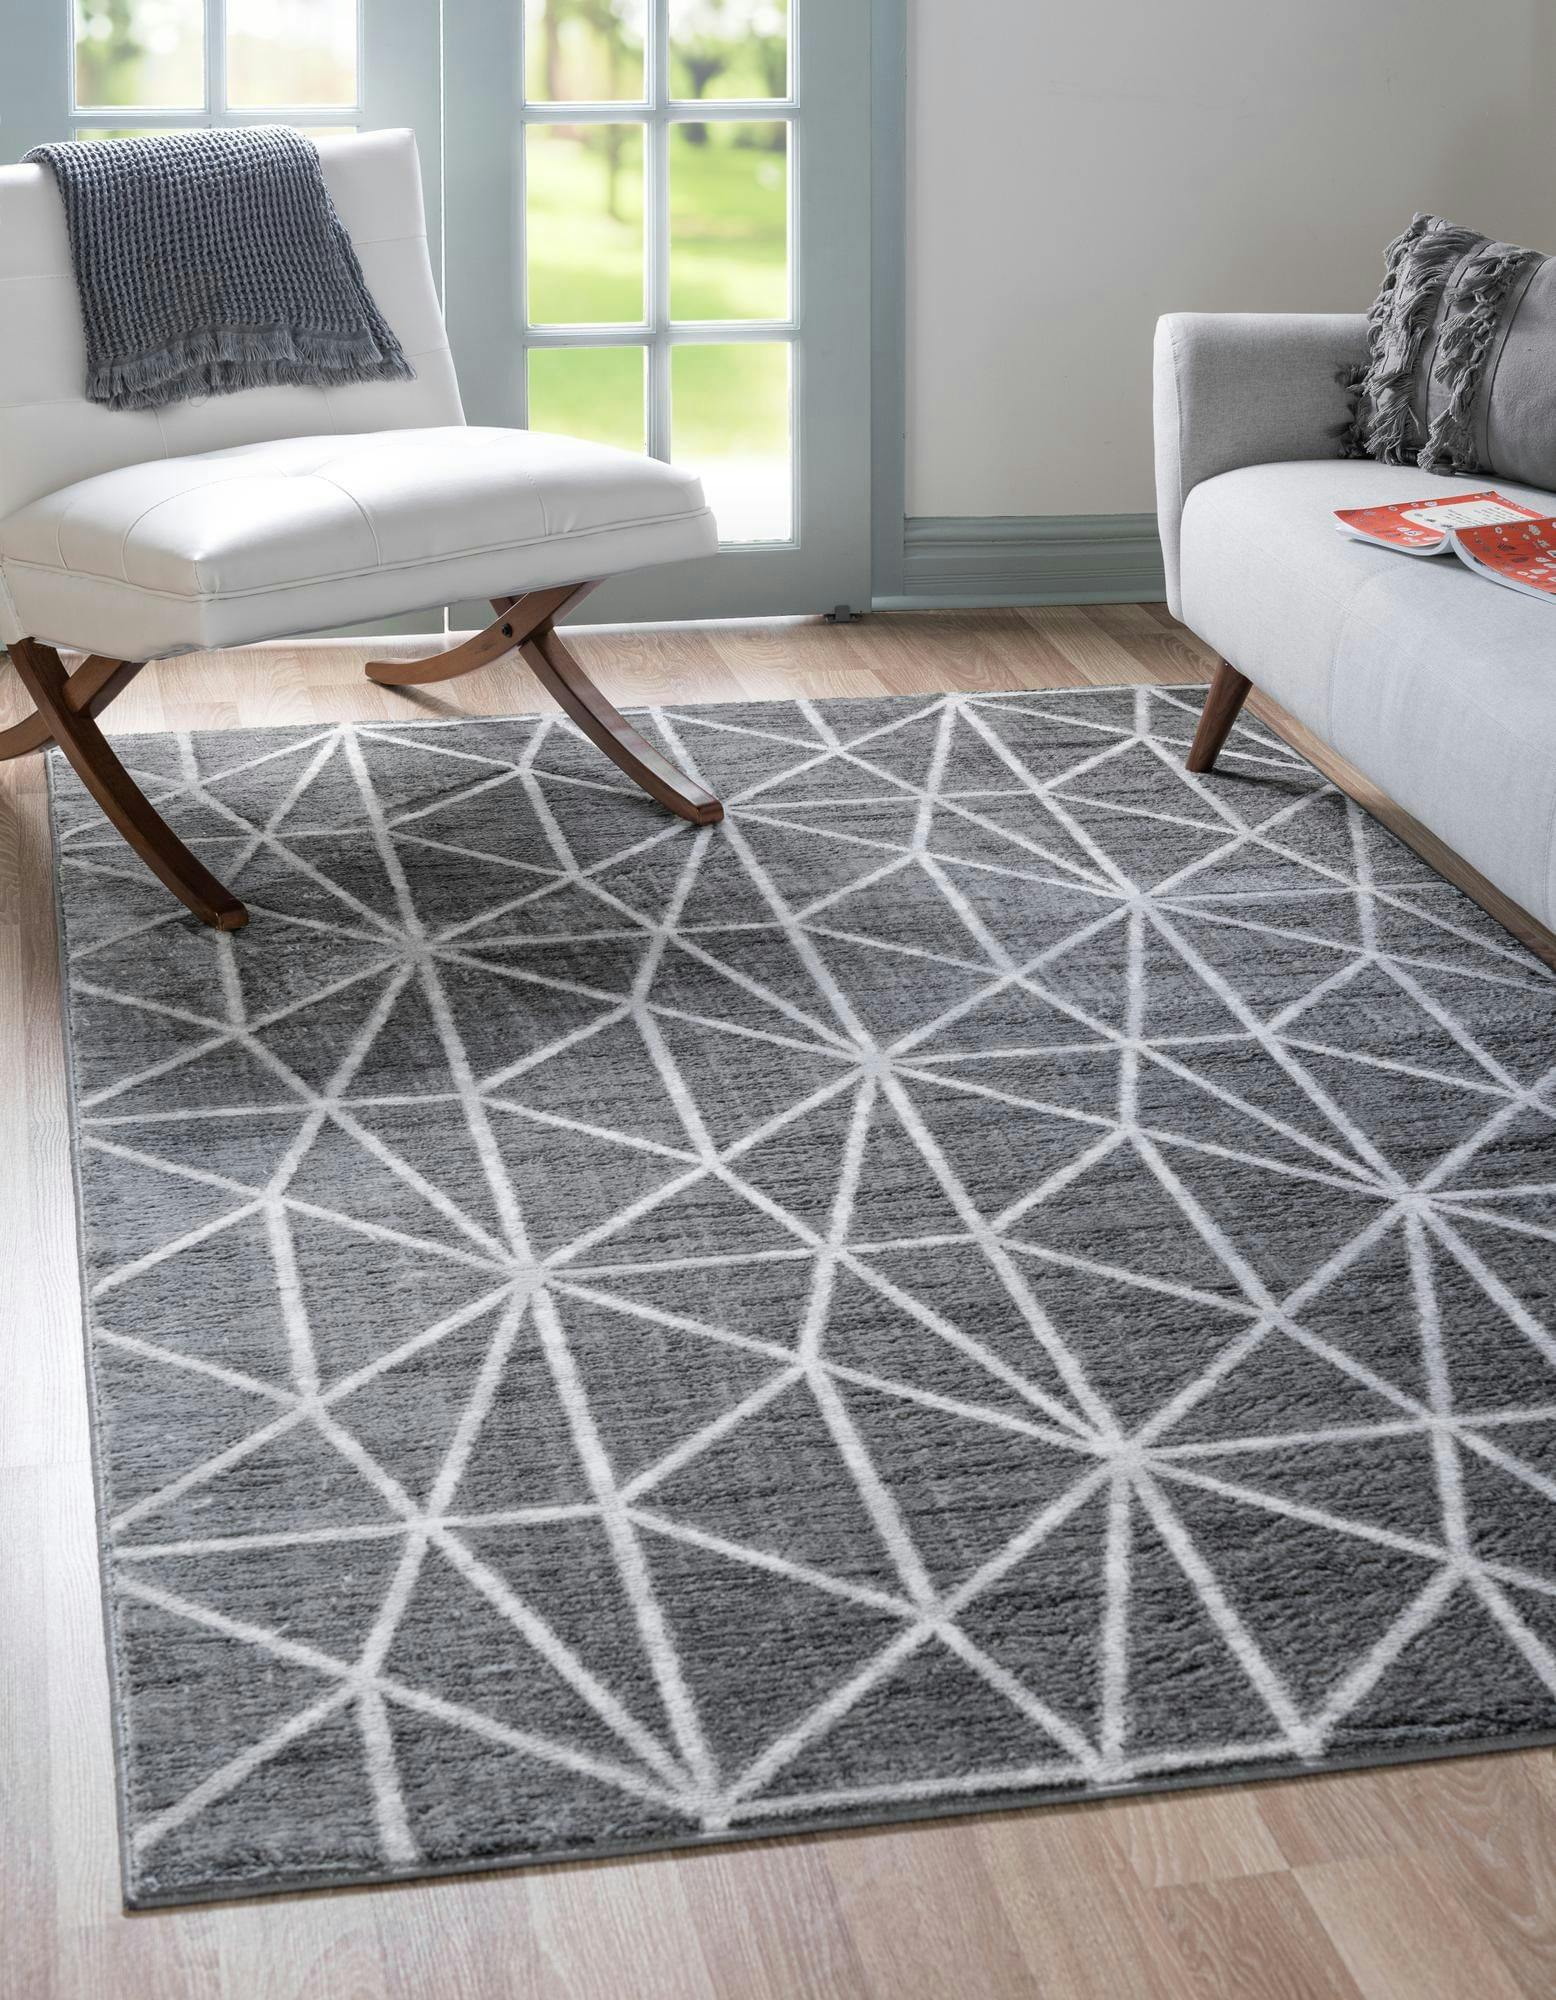 Modern Geometric Gray 5' x 8' Synthetic Area Rug for Indoor Use